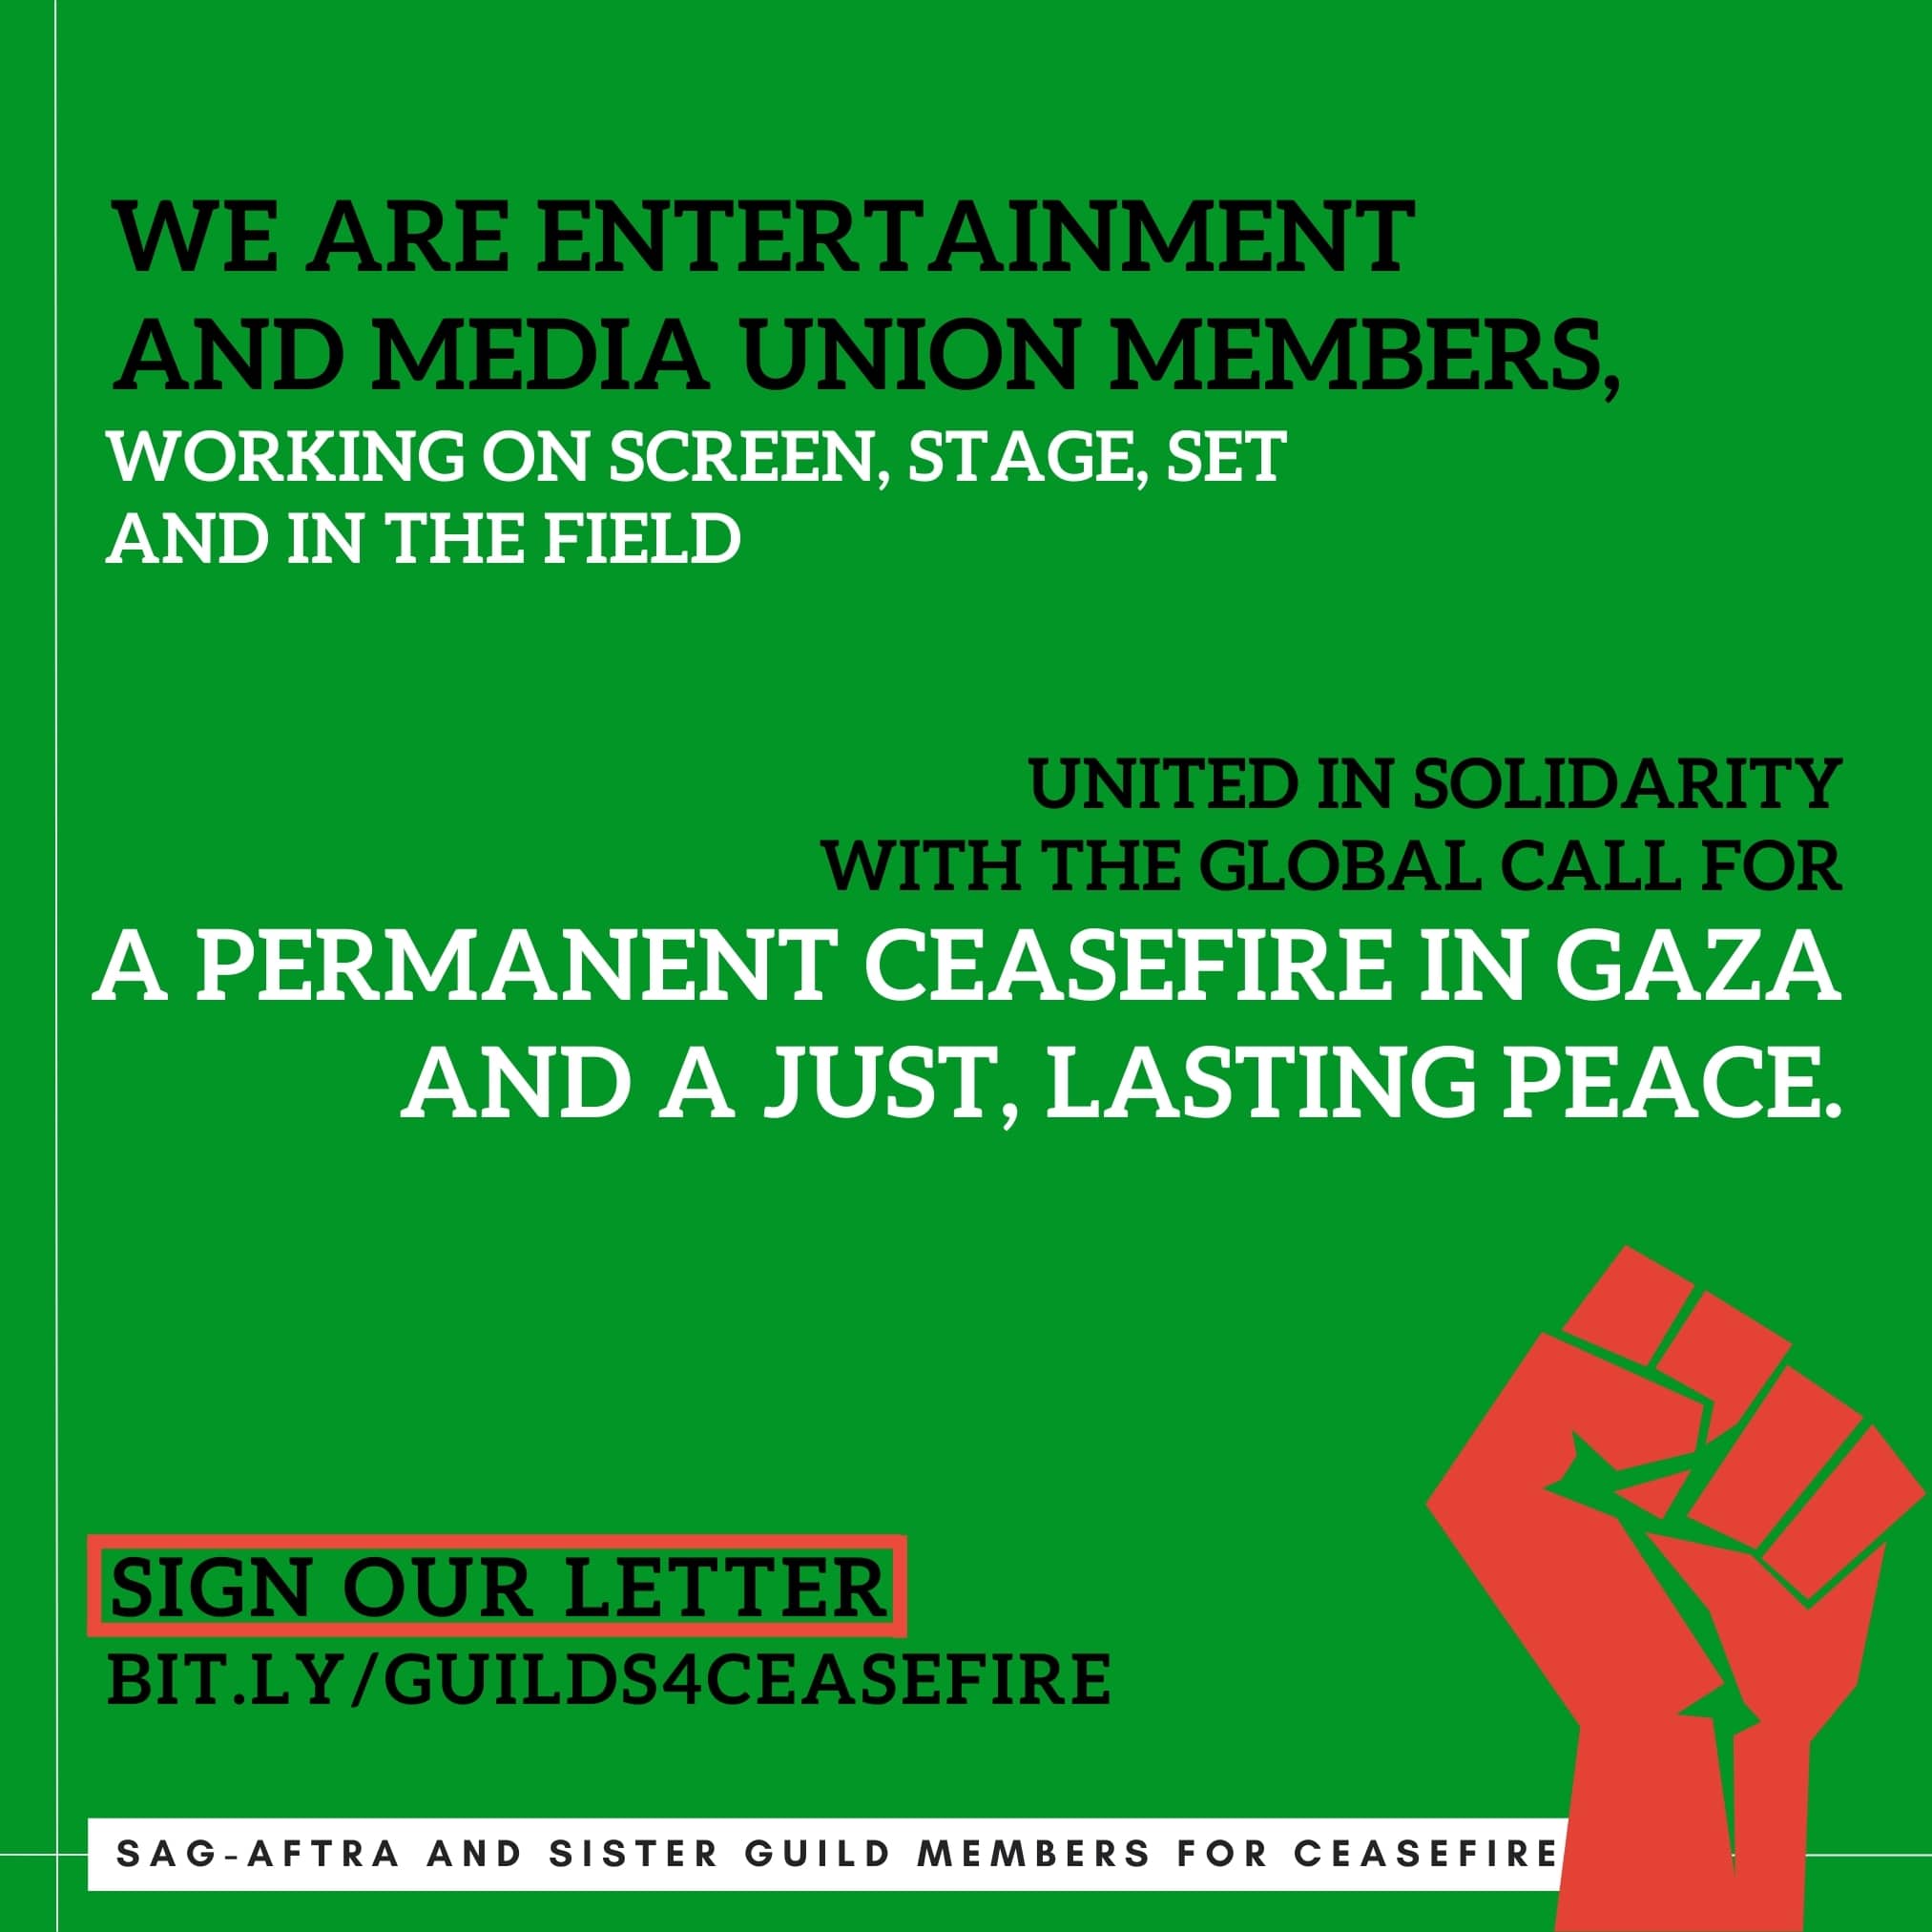 The Feast’s Statement in Solidarity with Gaza